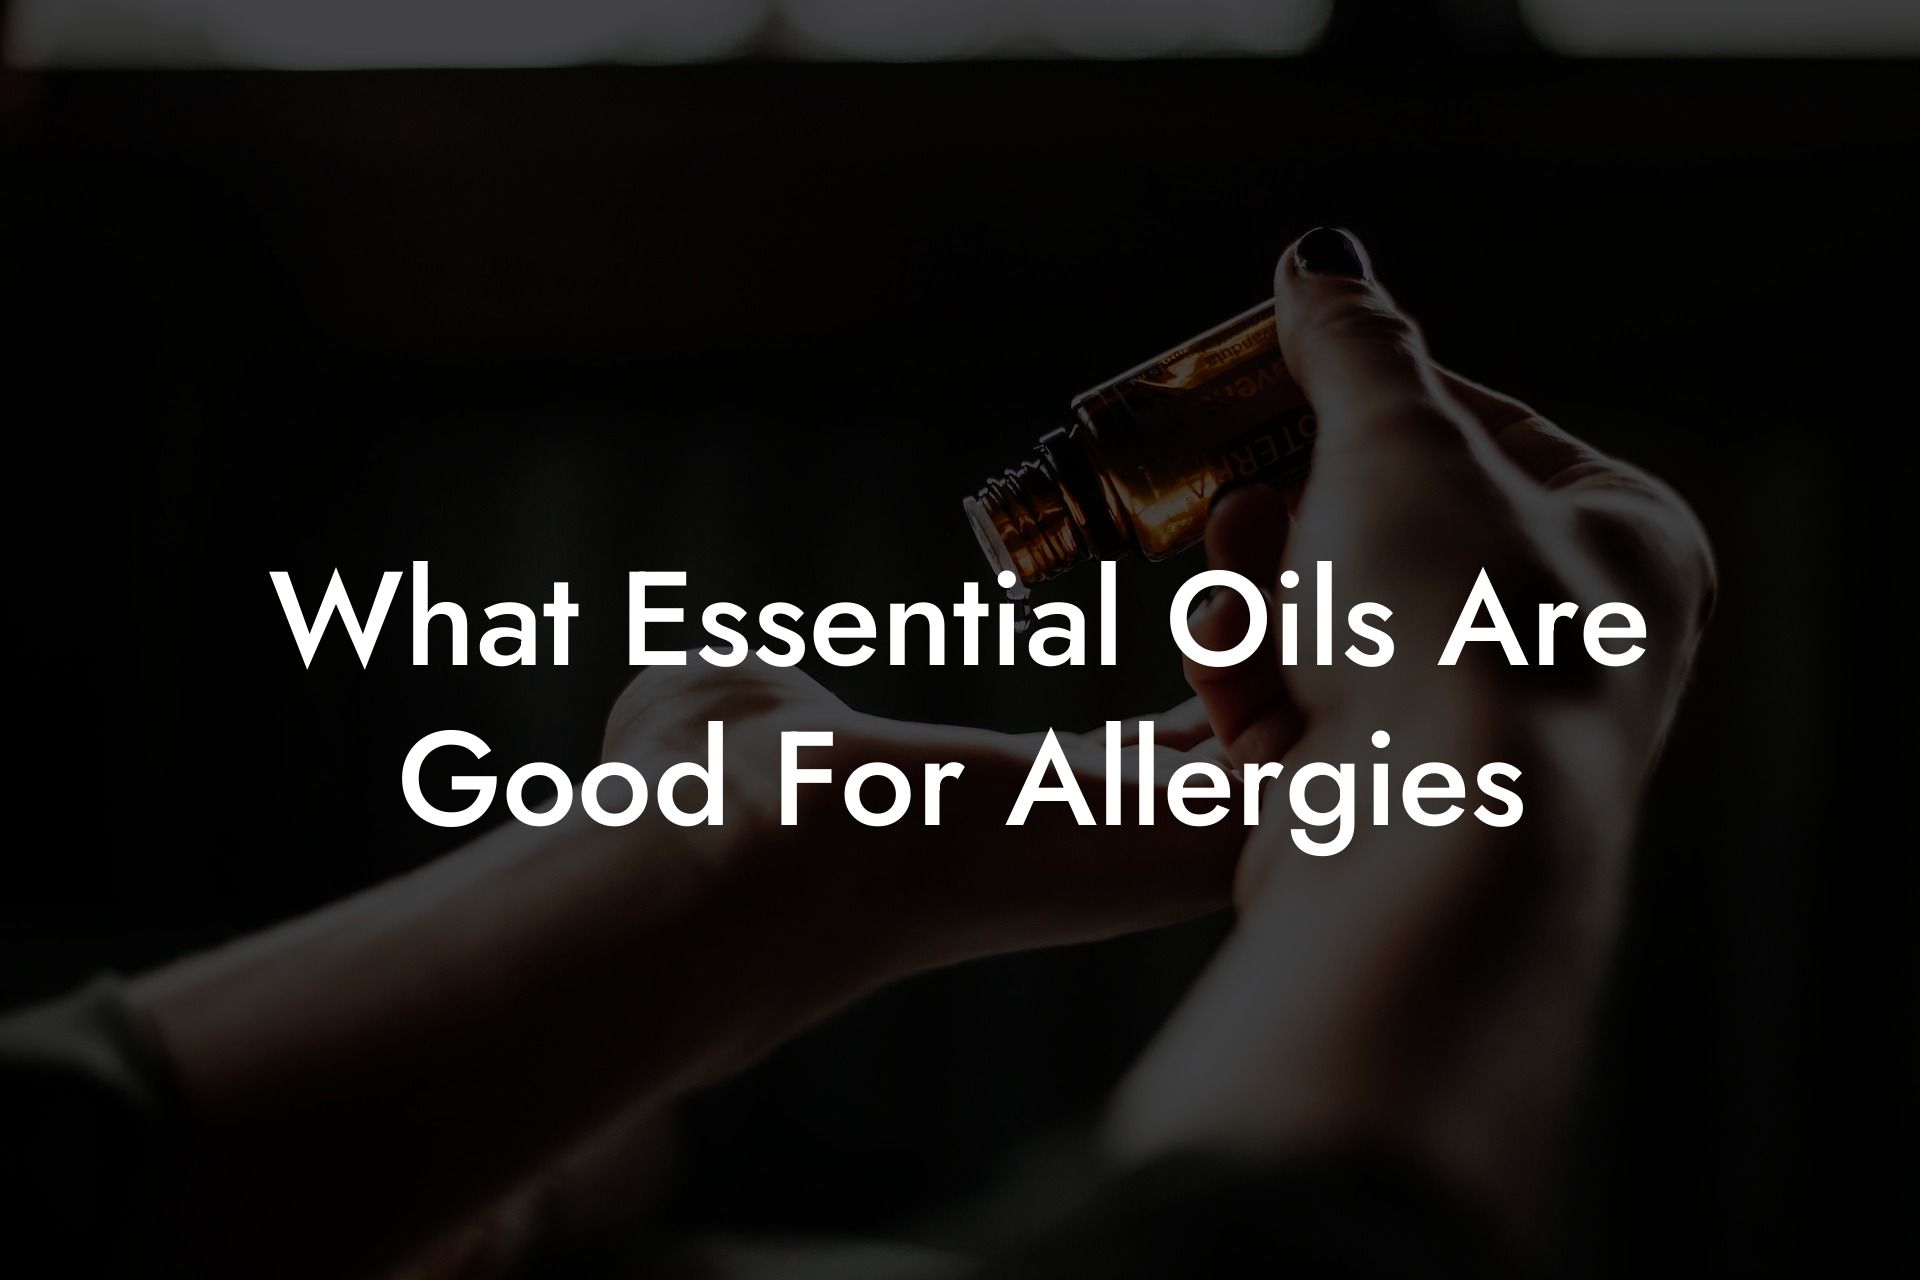 What Essential Oils Are Good For Allergies